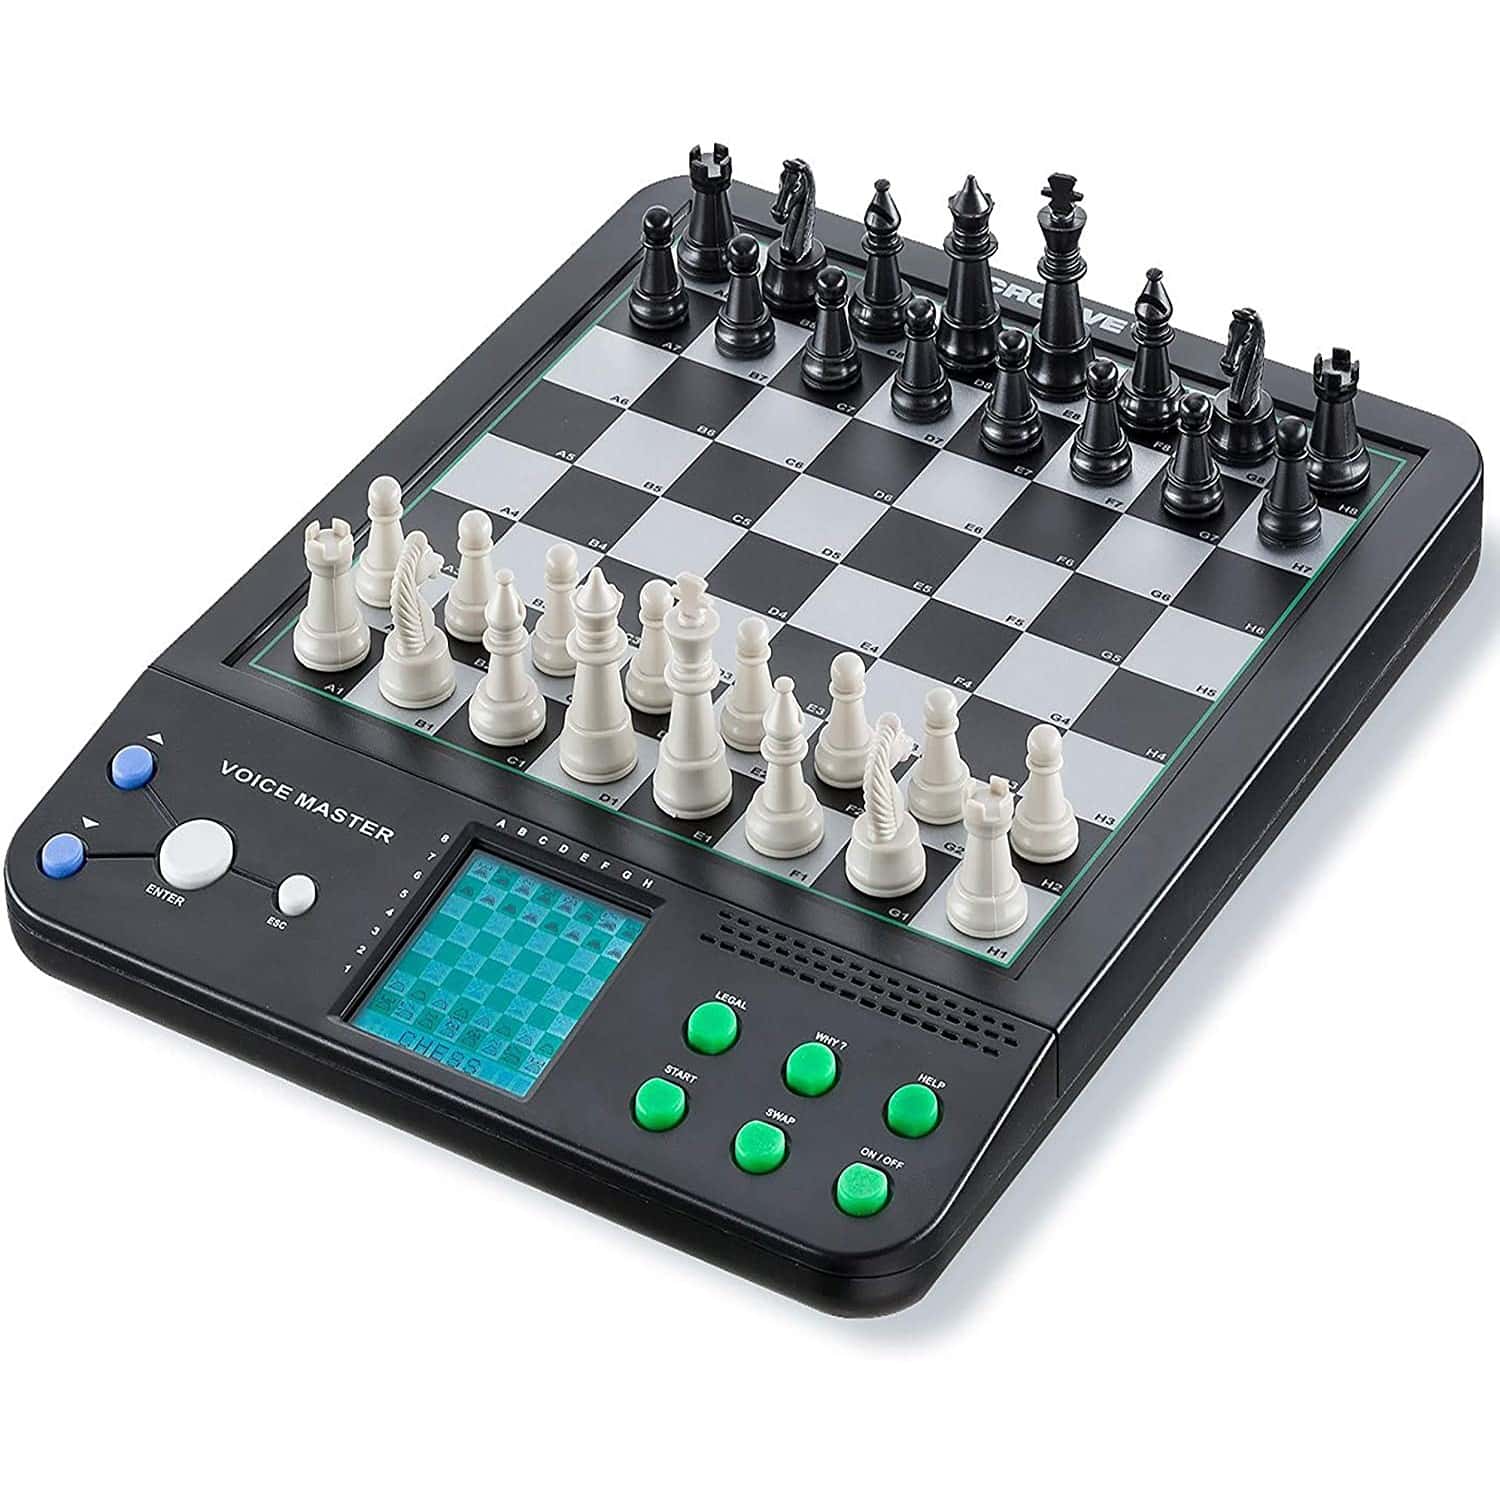 Top 10 Best Electronic Chess Boards For Beginners Reviews Guides